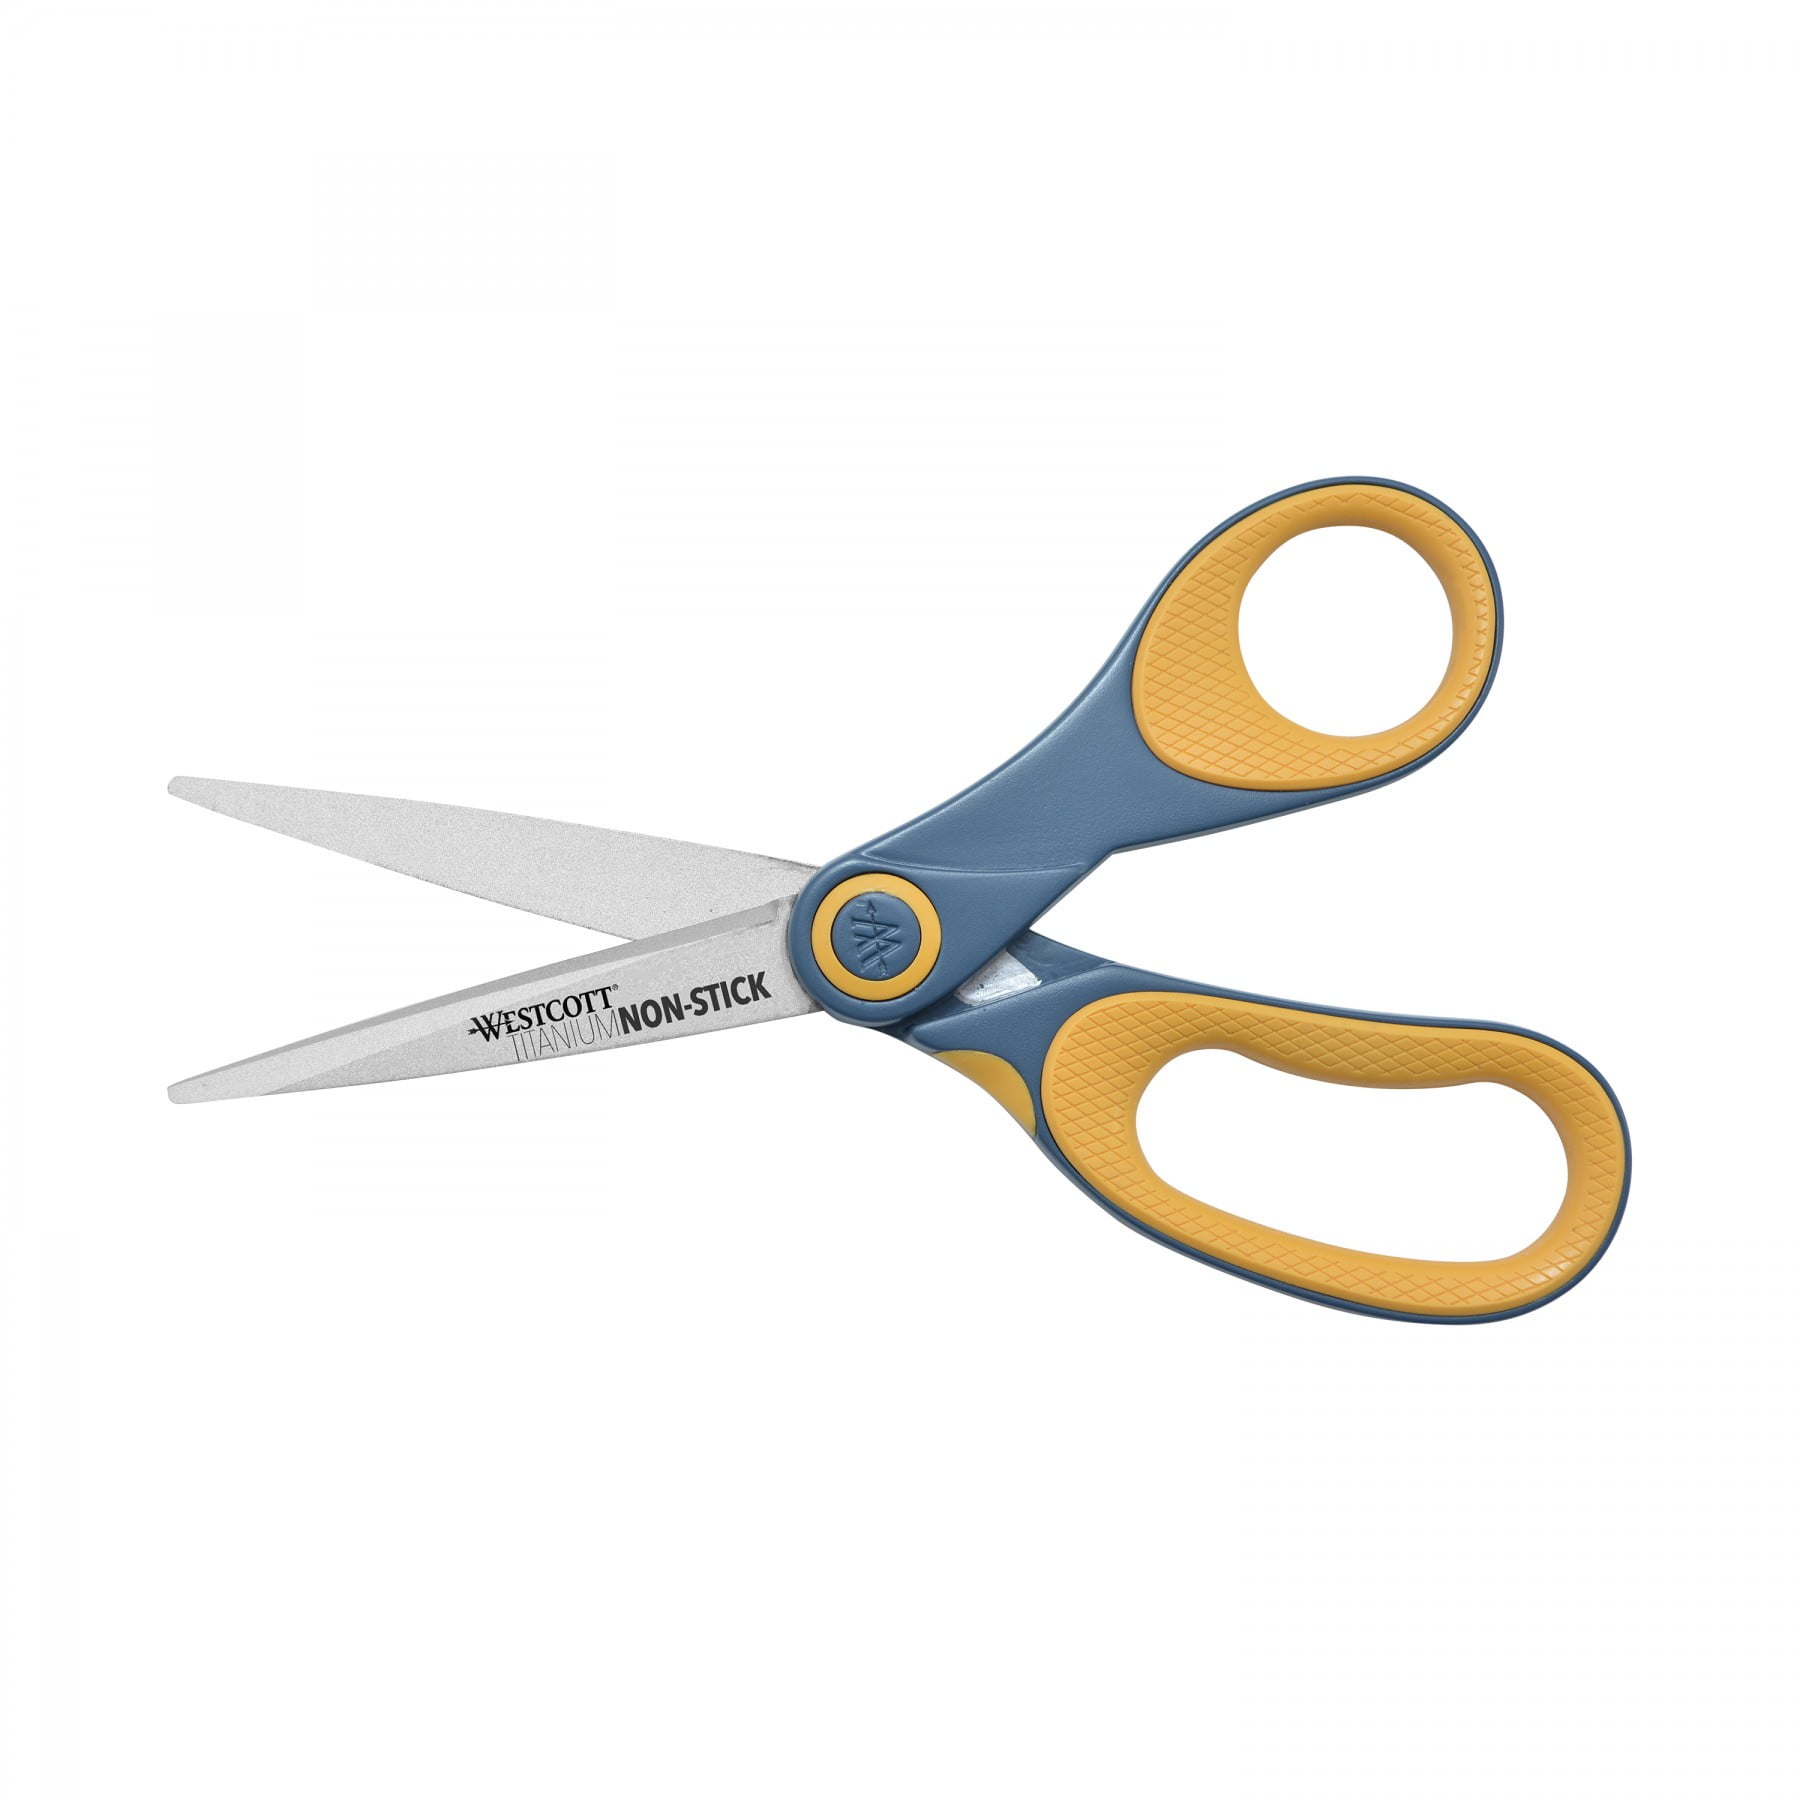  Westcott Titanium Bonded Scissors with Antimicrobial  Protection, 8 Inches, Pointed : Learning: Supplies